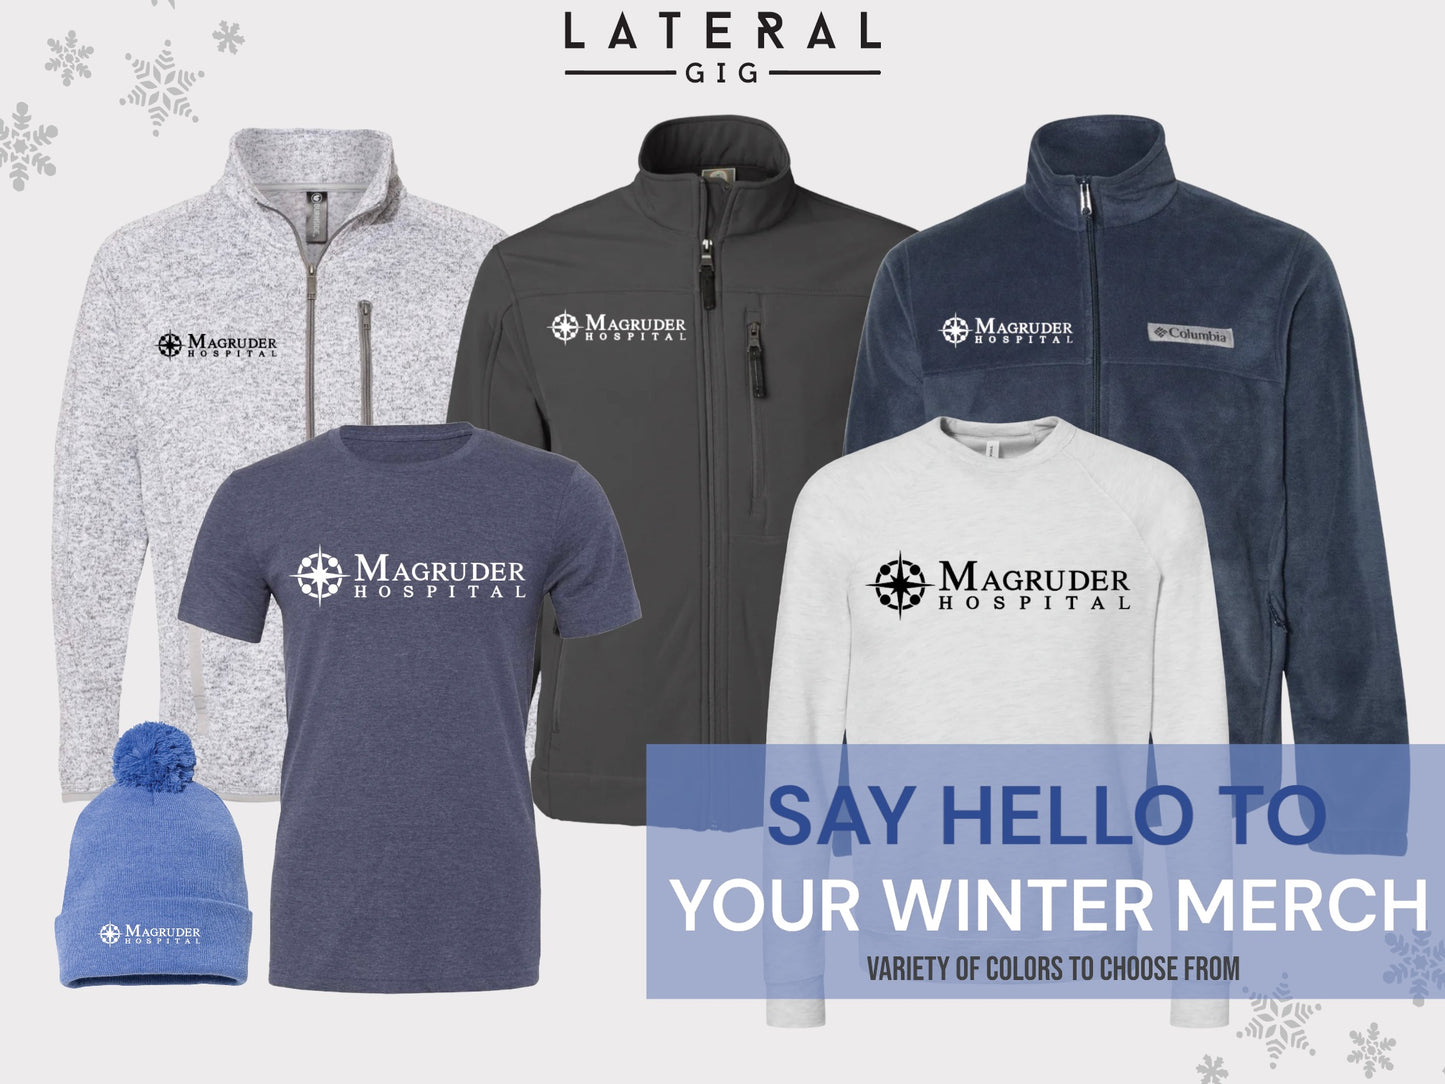 Lateral Gig Gift Card